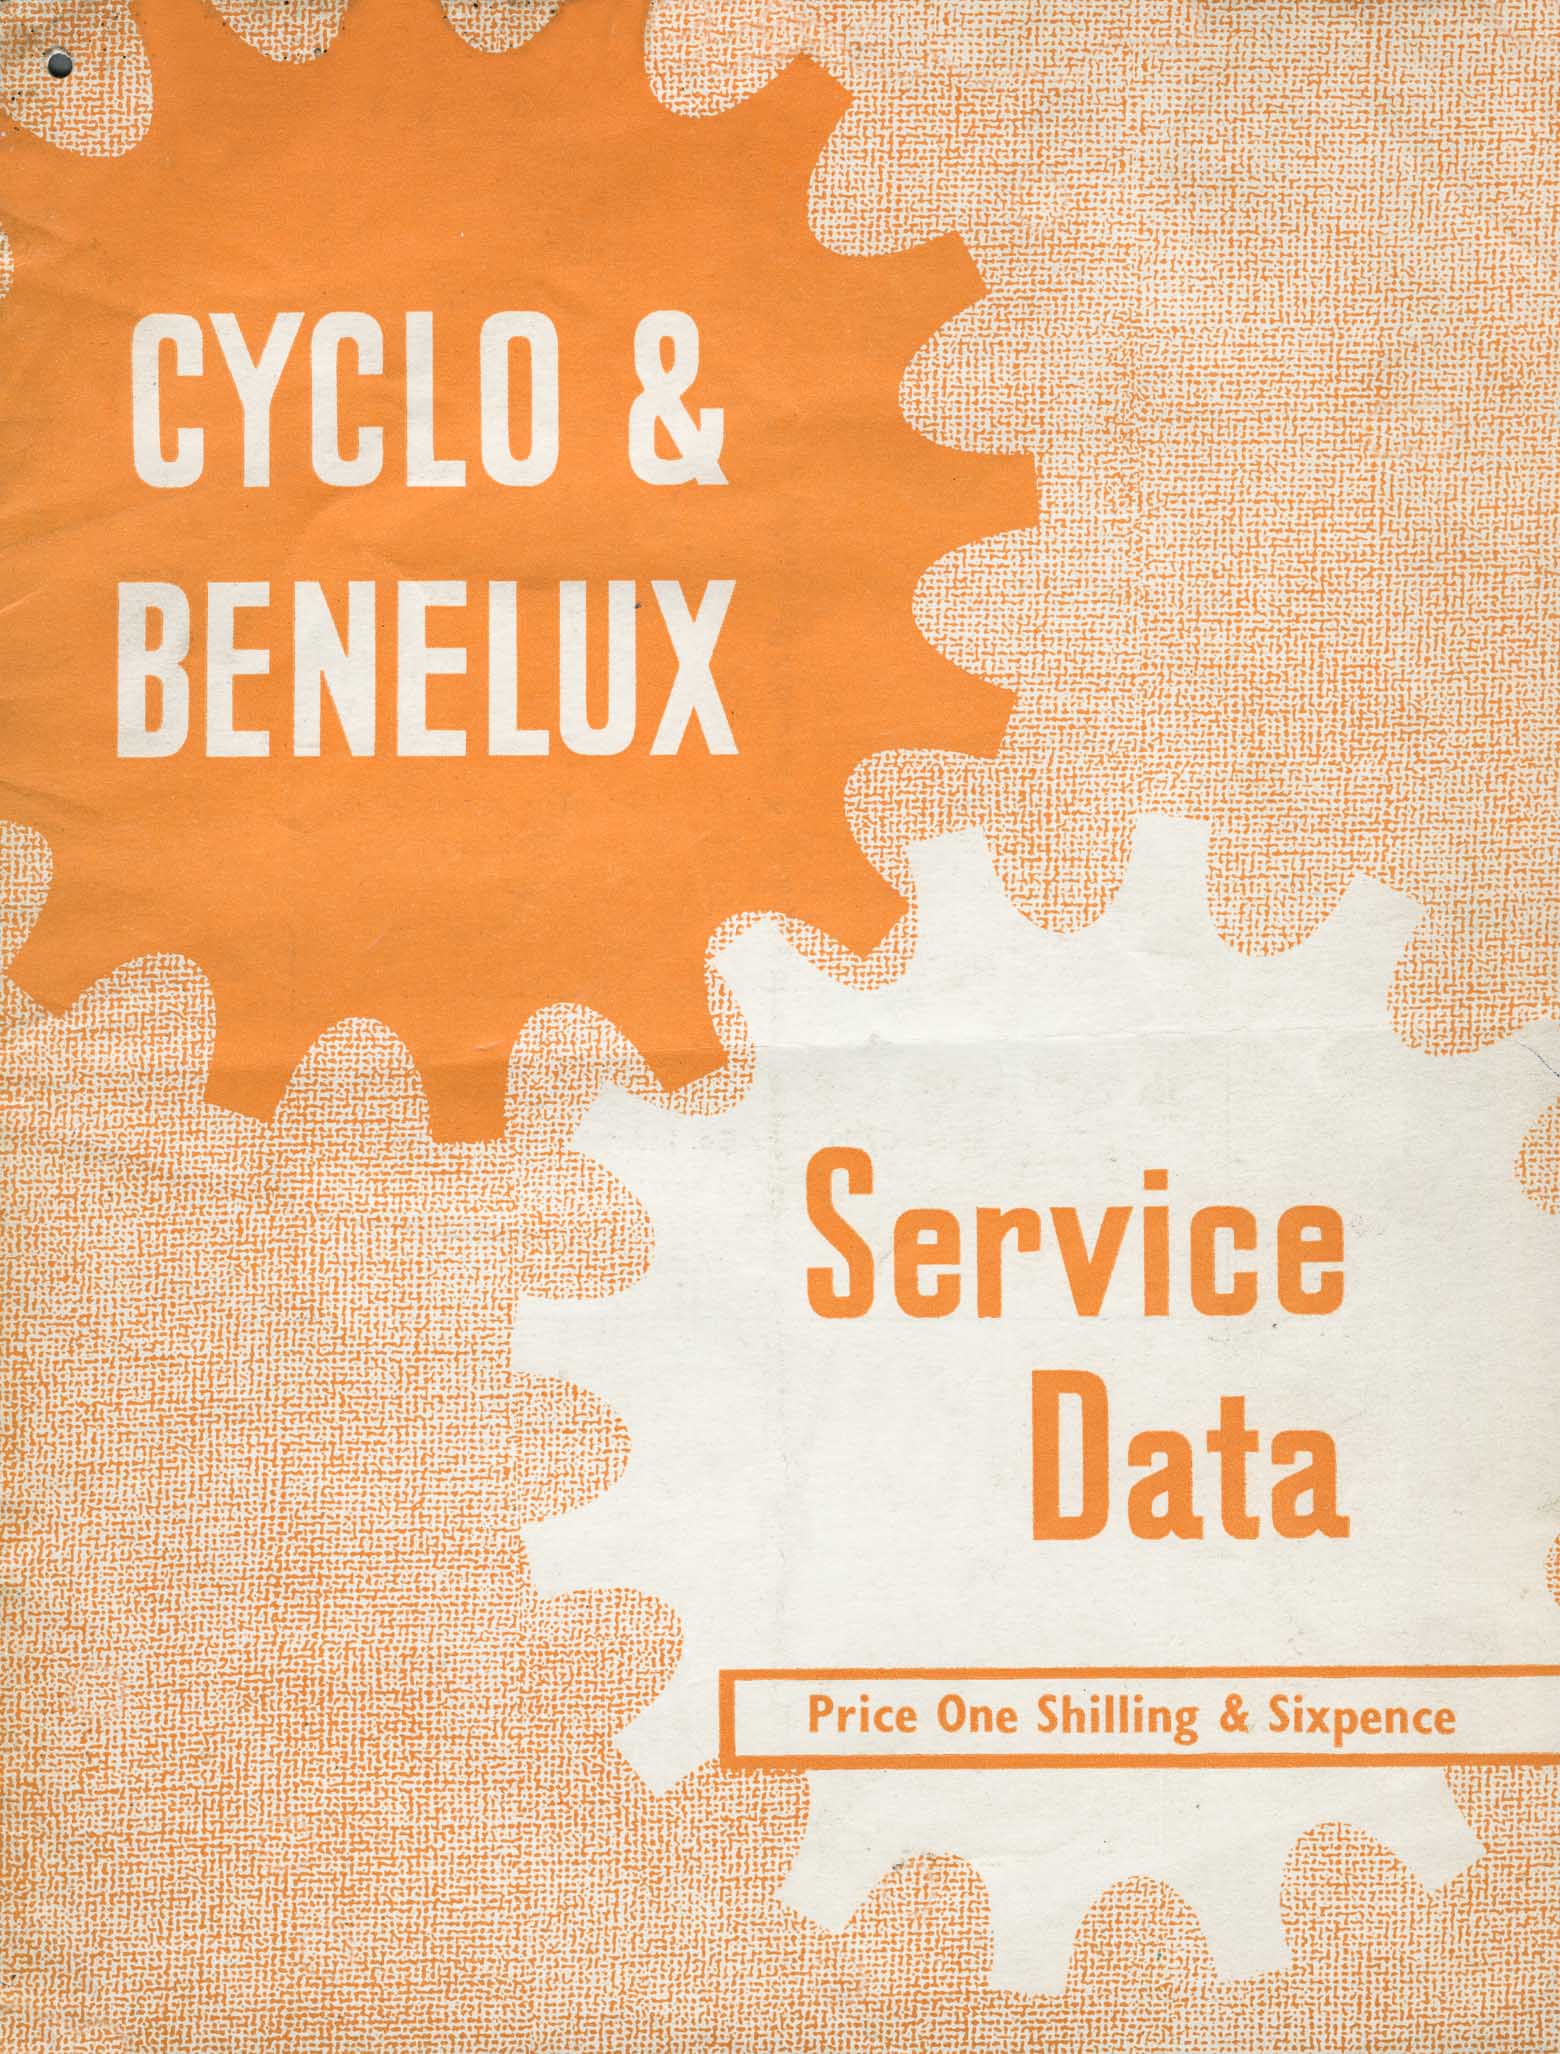 Cyclo & Benelux Service Data page front cover main image